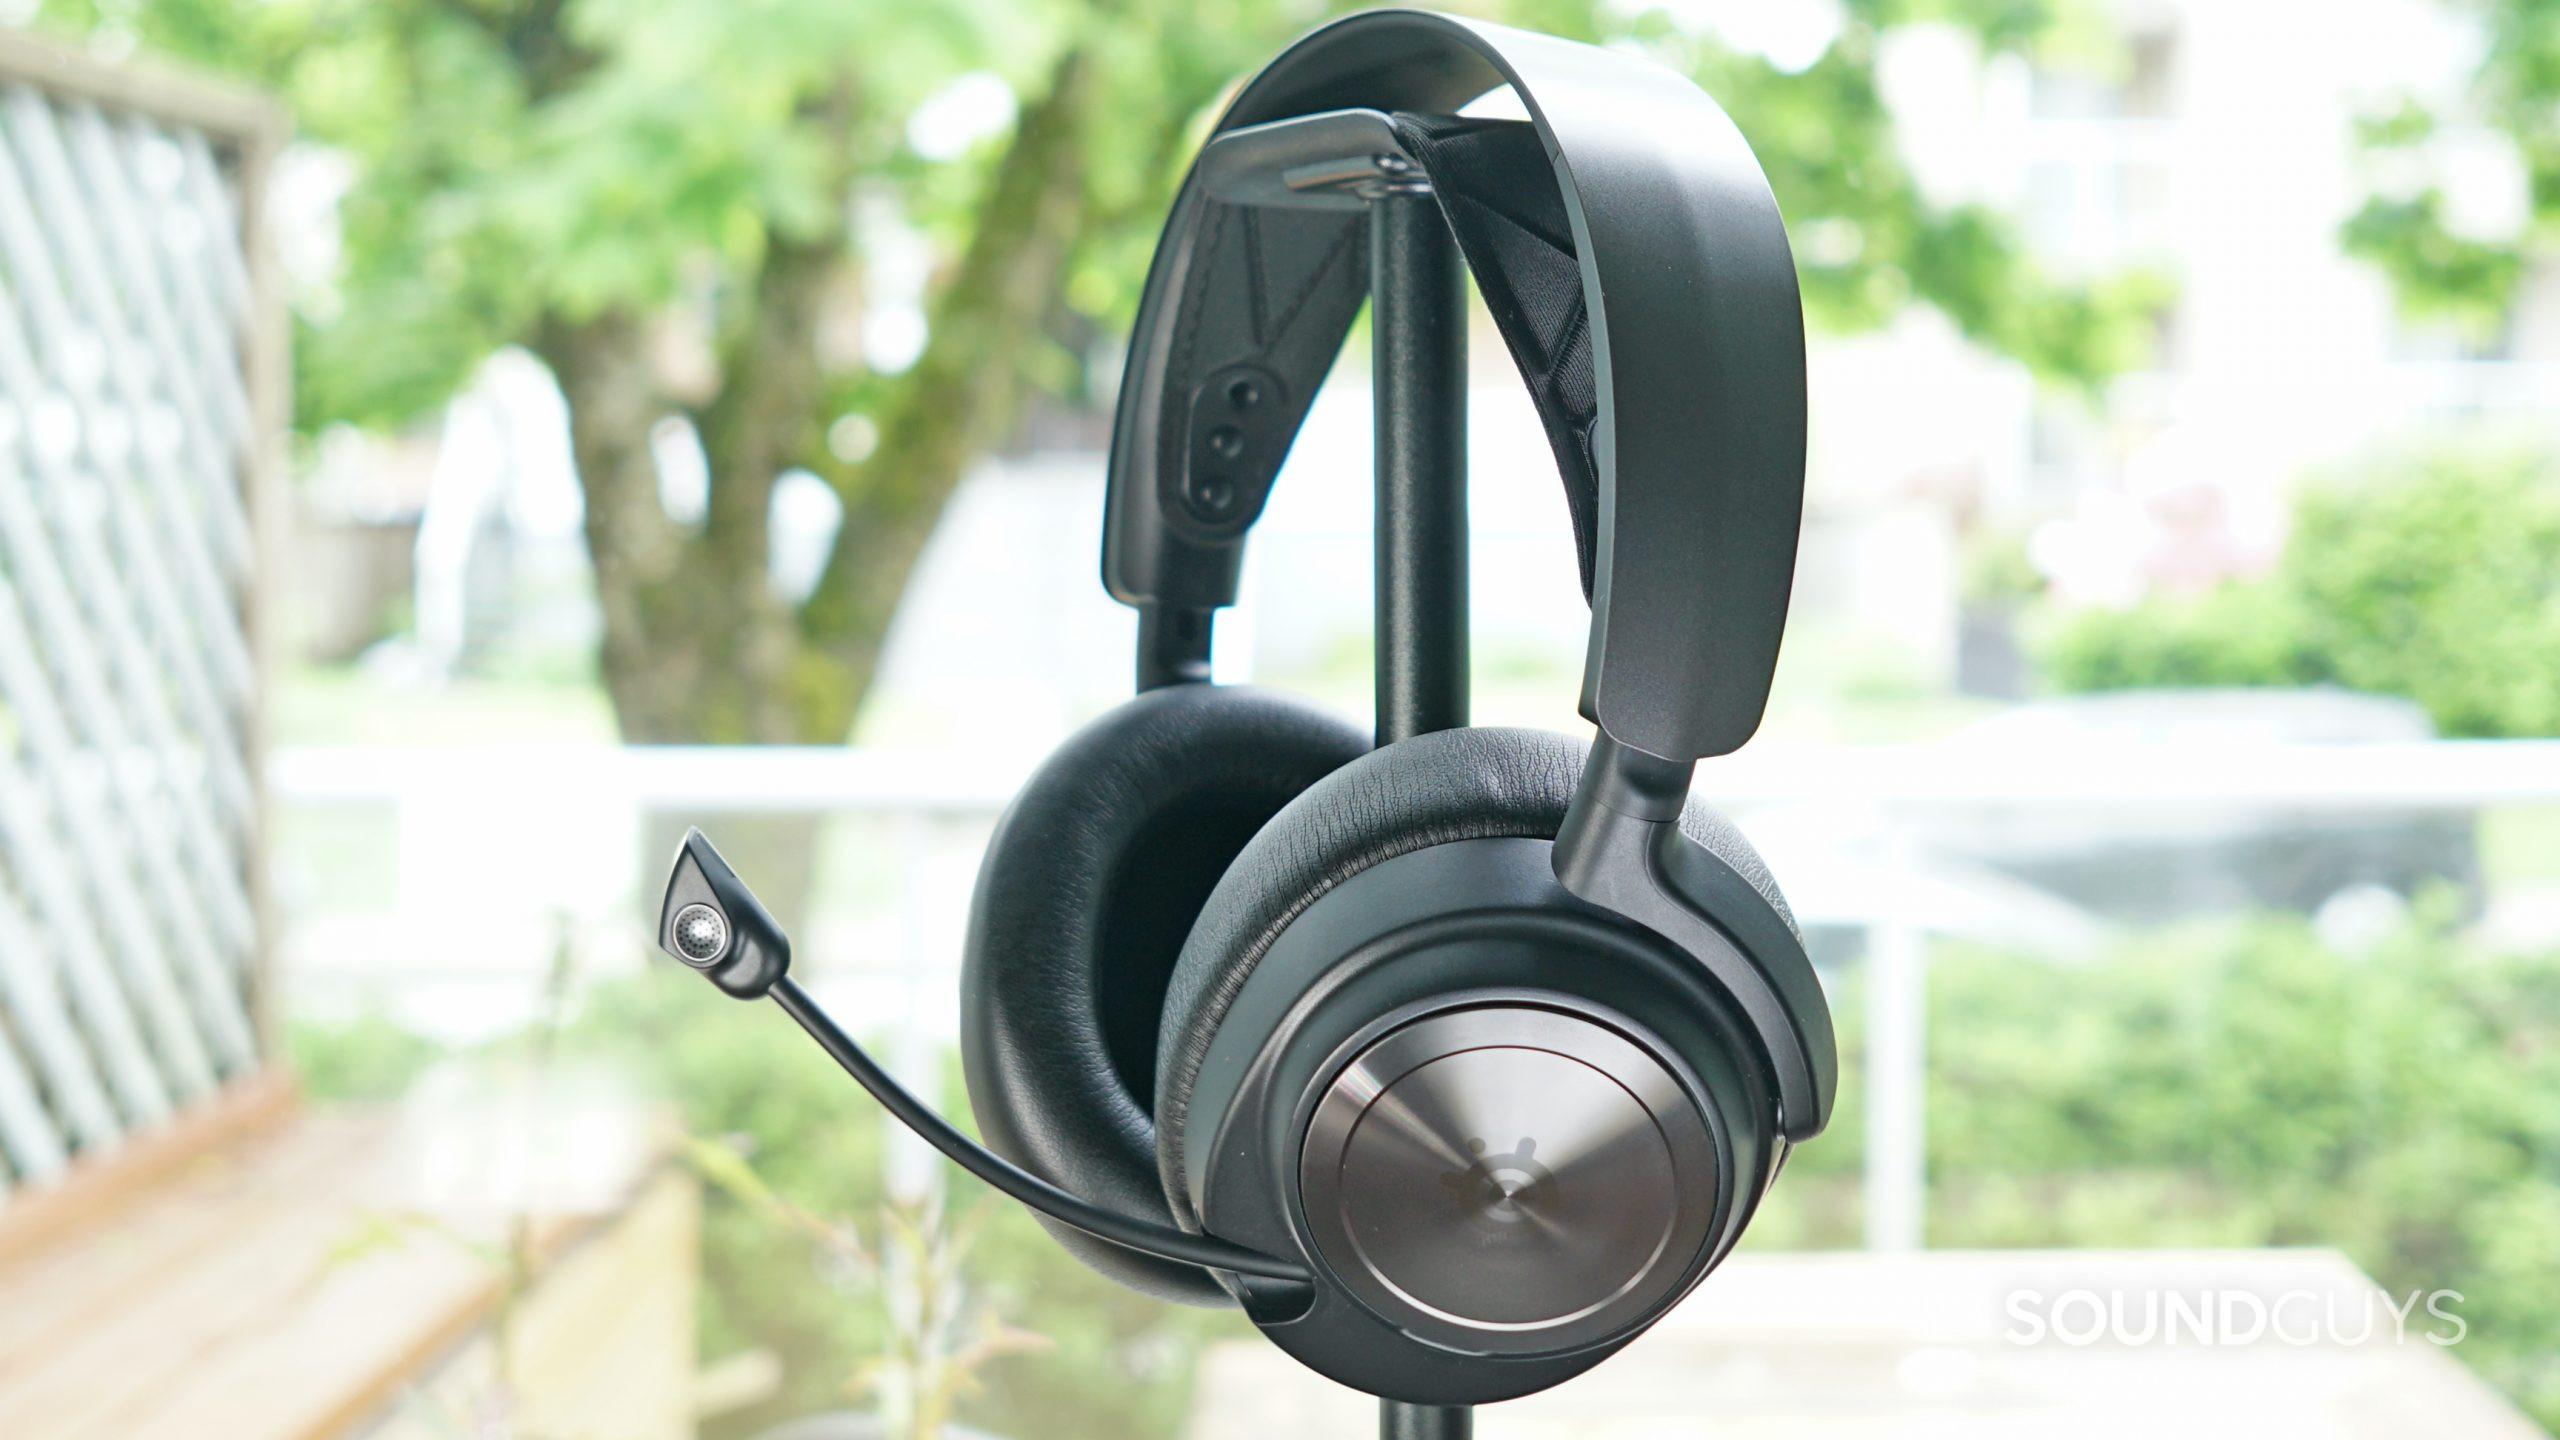 The SteelSeries Arctis Nova Pro sits on a headphone stand